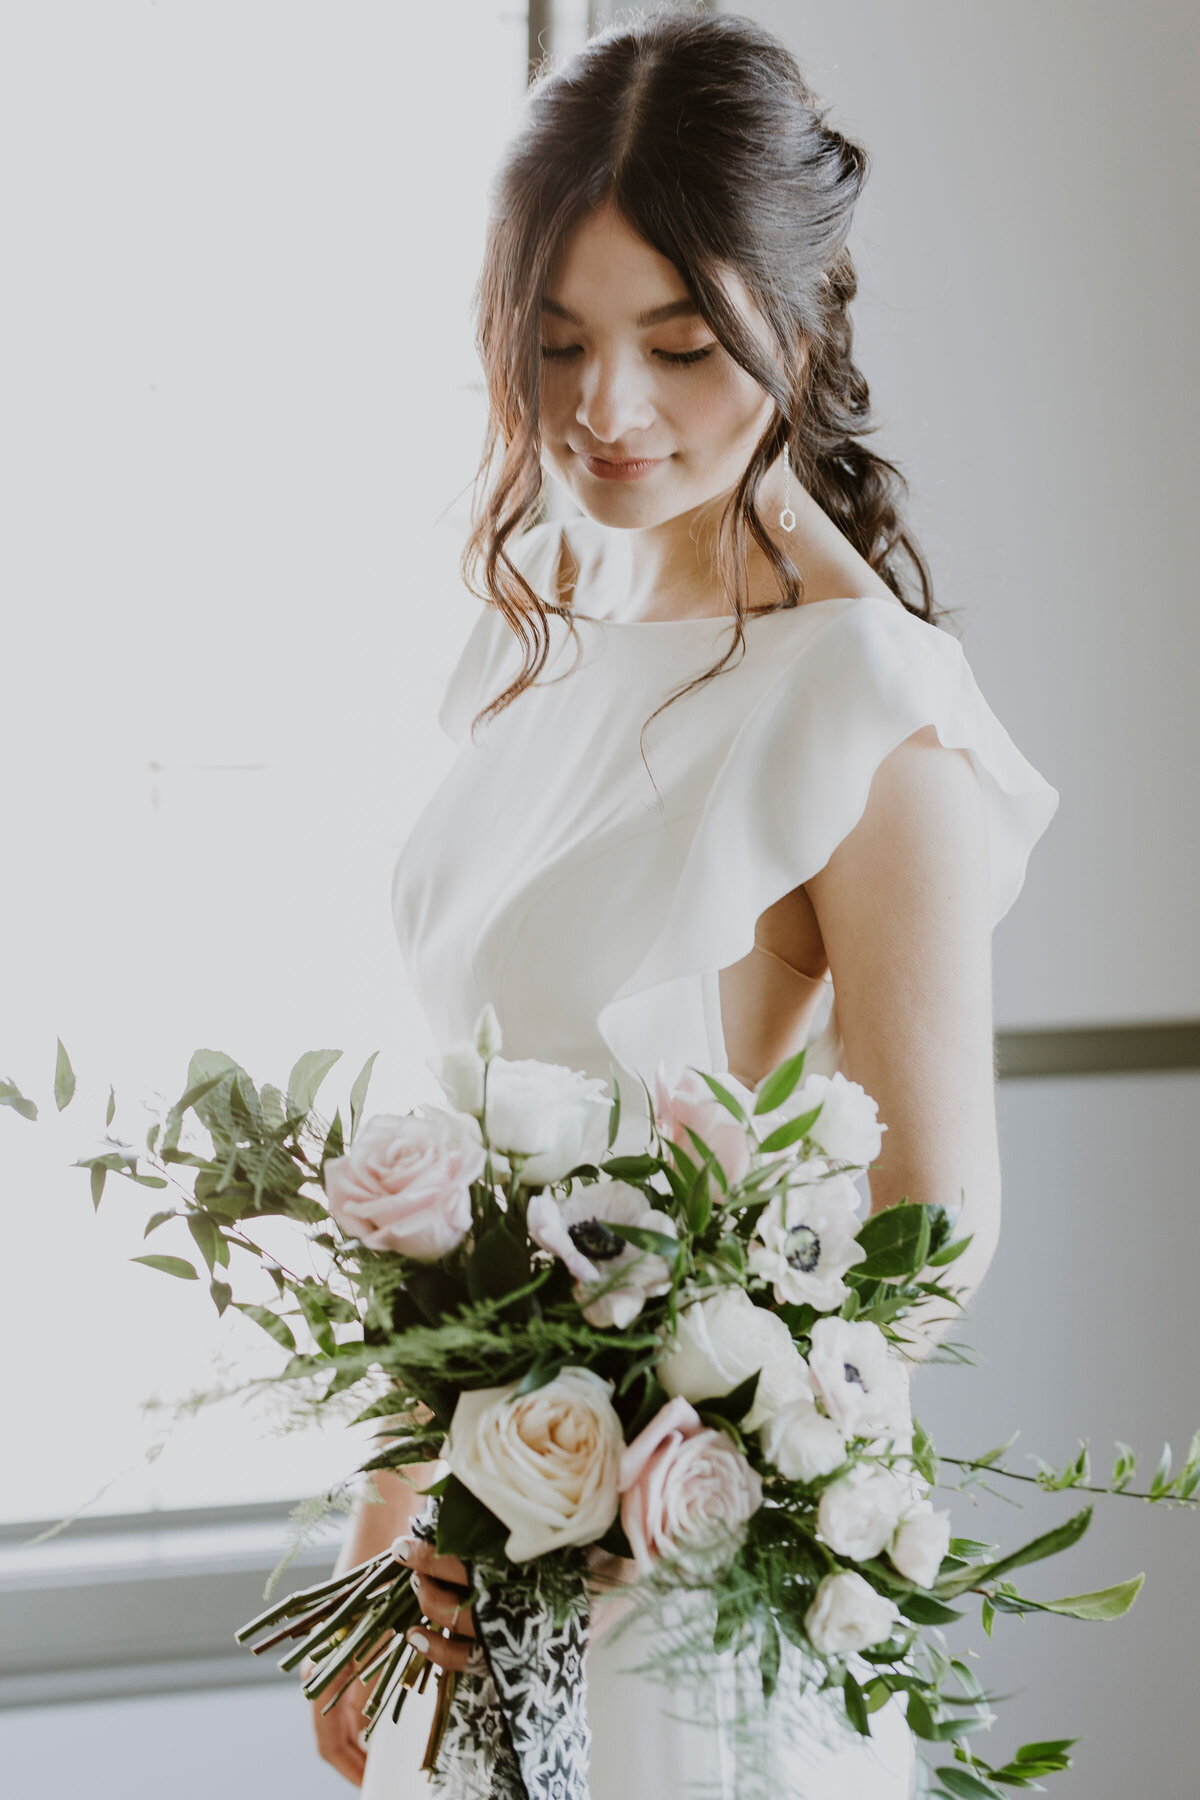 Romantic and elegant bridal bouquet with pink and white roses by Hen & Chicks, classic Calgary, Alberta wedding florist, featured on the Brontë Bride Vendor Guide.